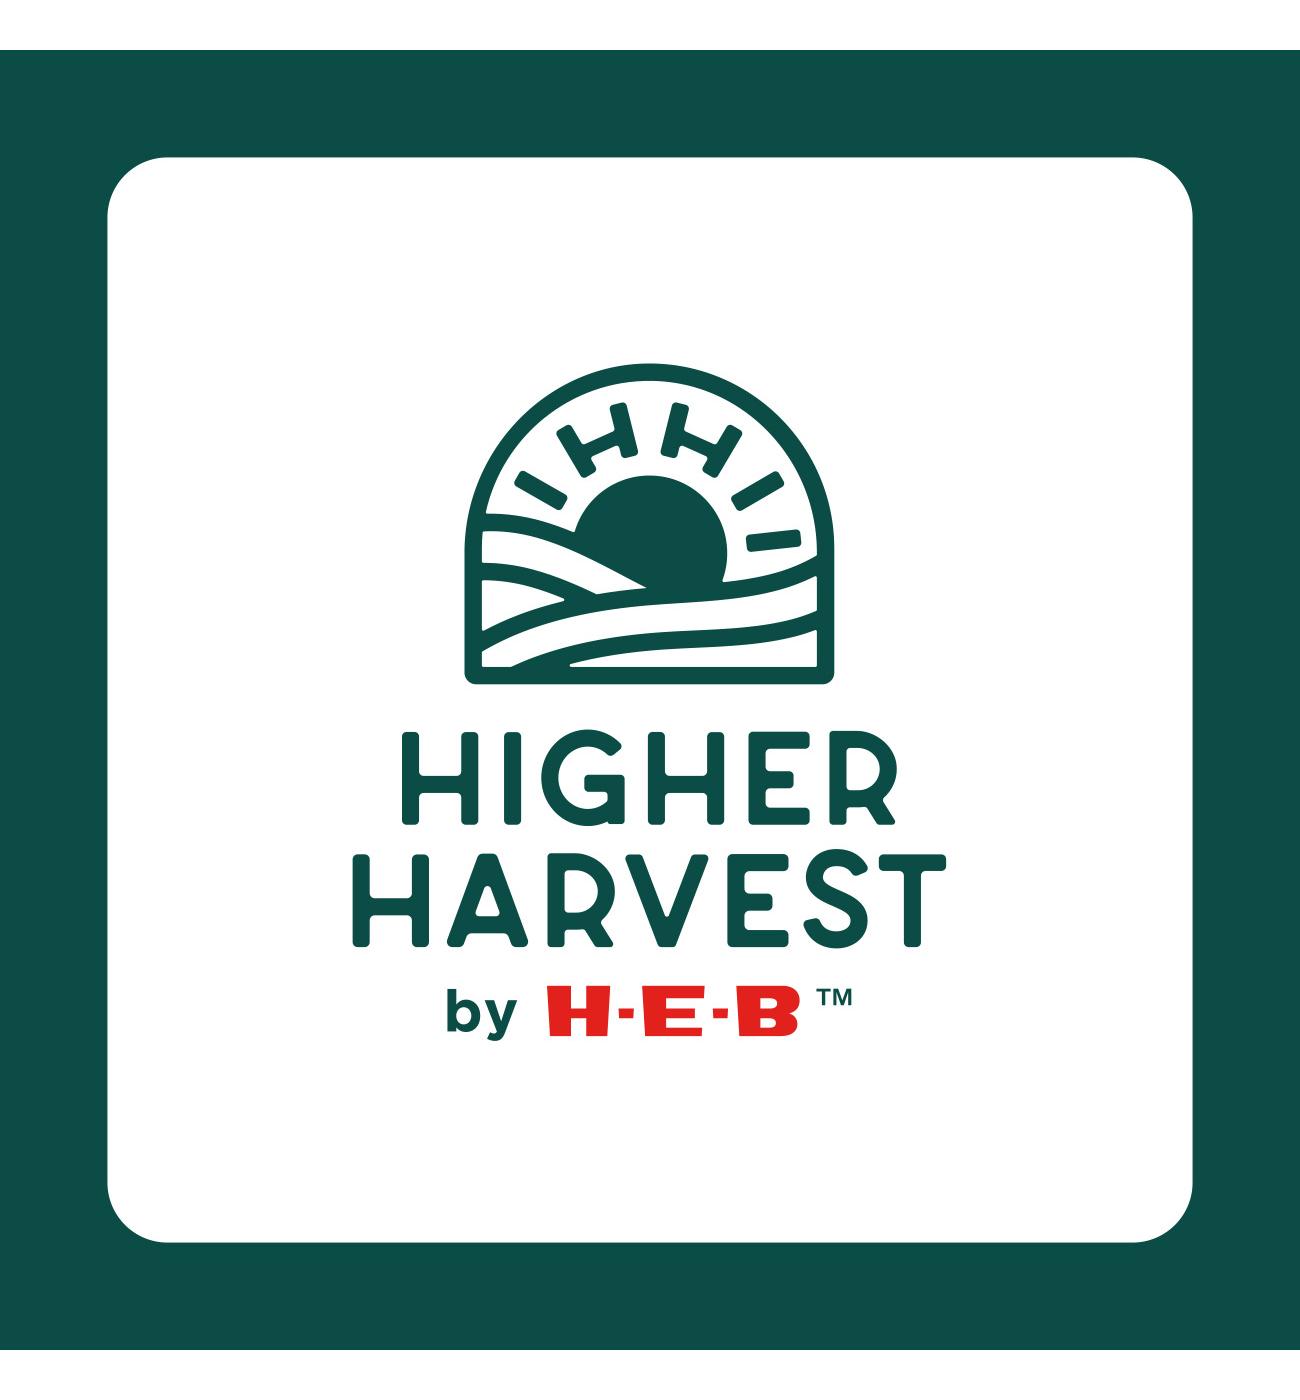 Higher Harvest by H-E-B Low Carb Lifestyle Wheat Bread; image 3 of 3